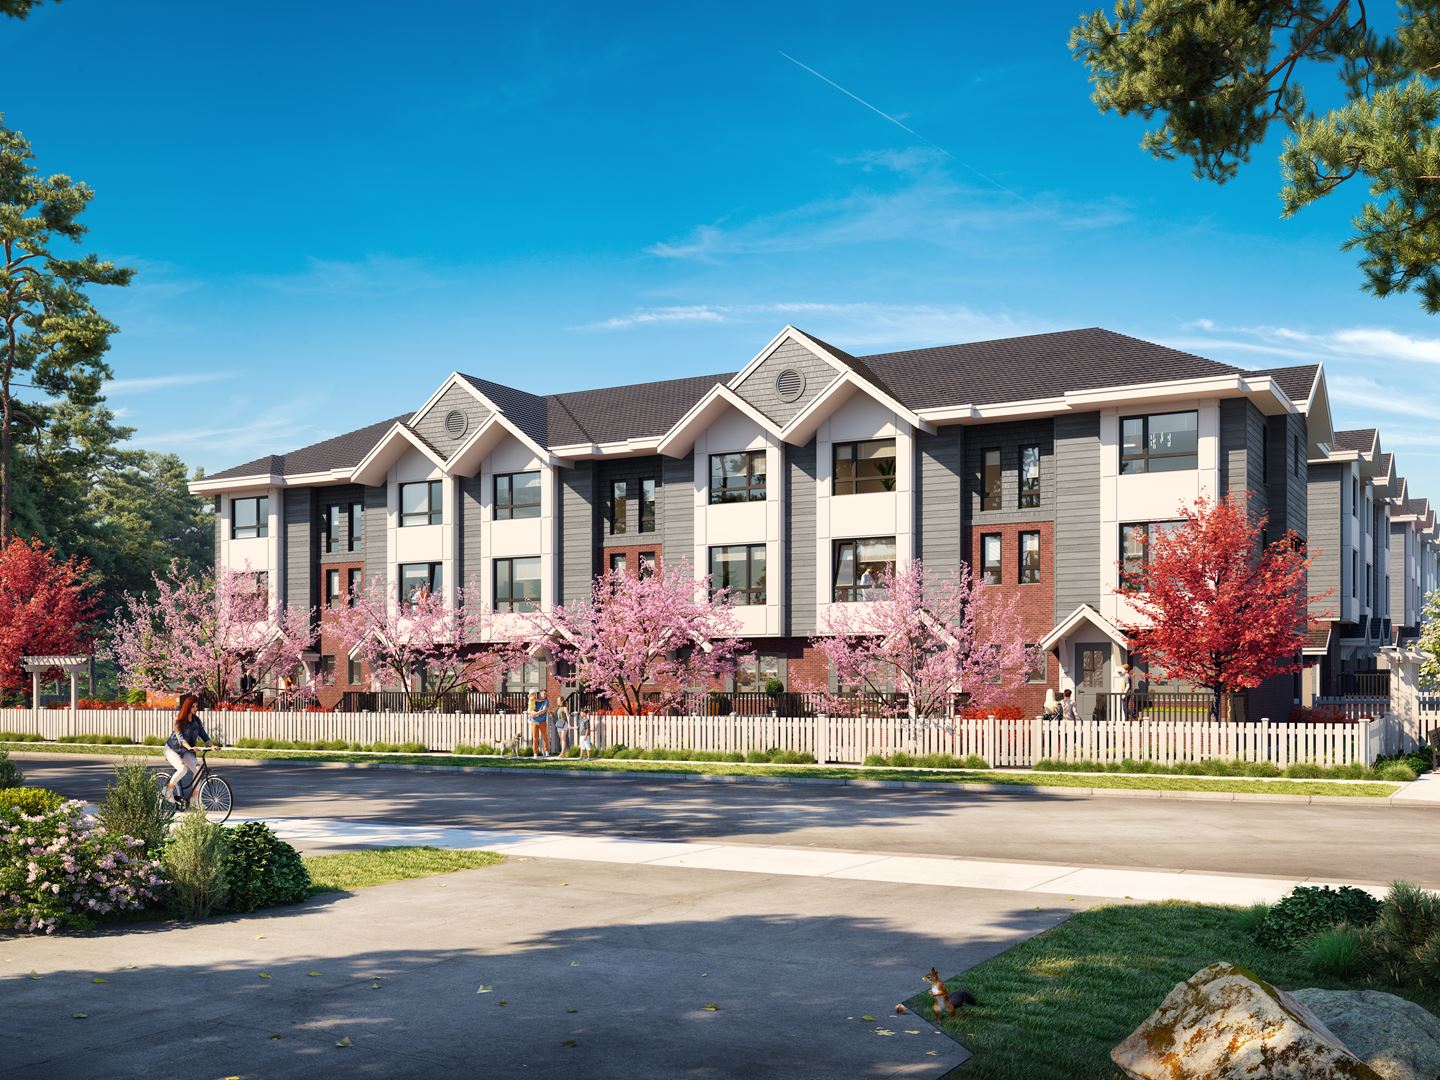 A collection of 38 four-bedroom family townhomes in the Boundary Park area.